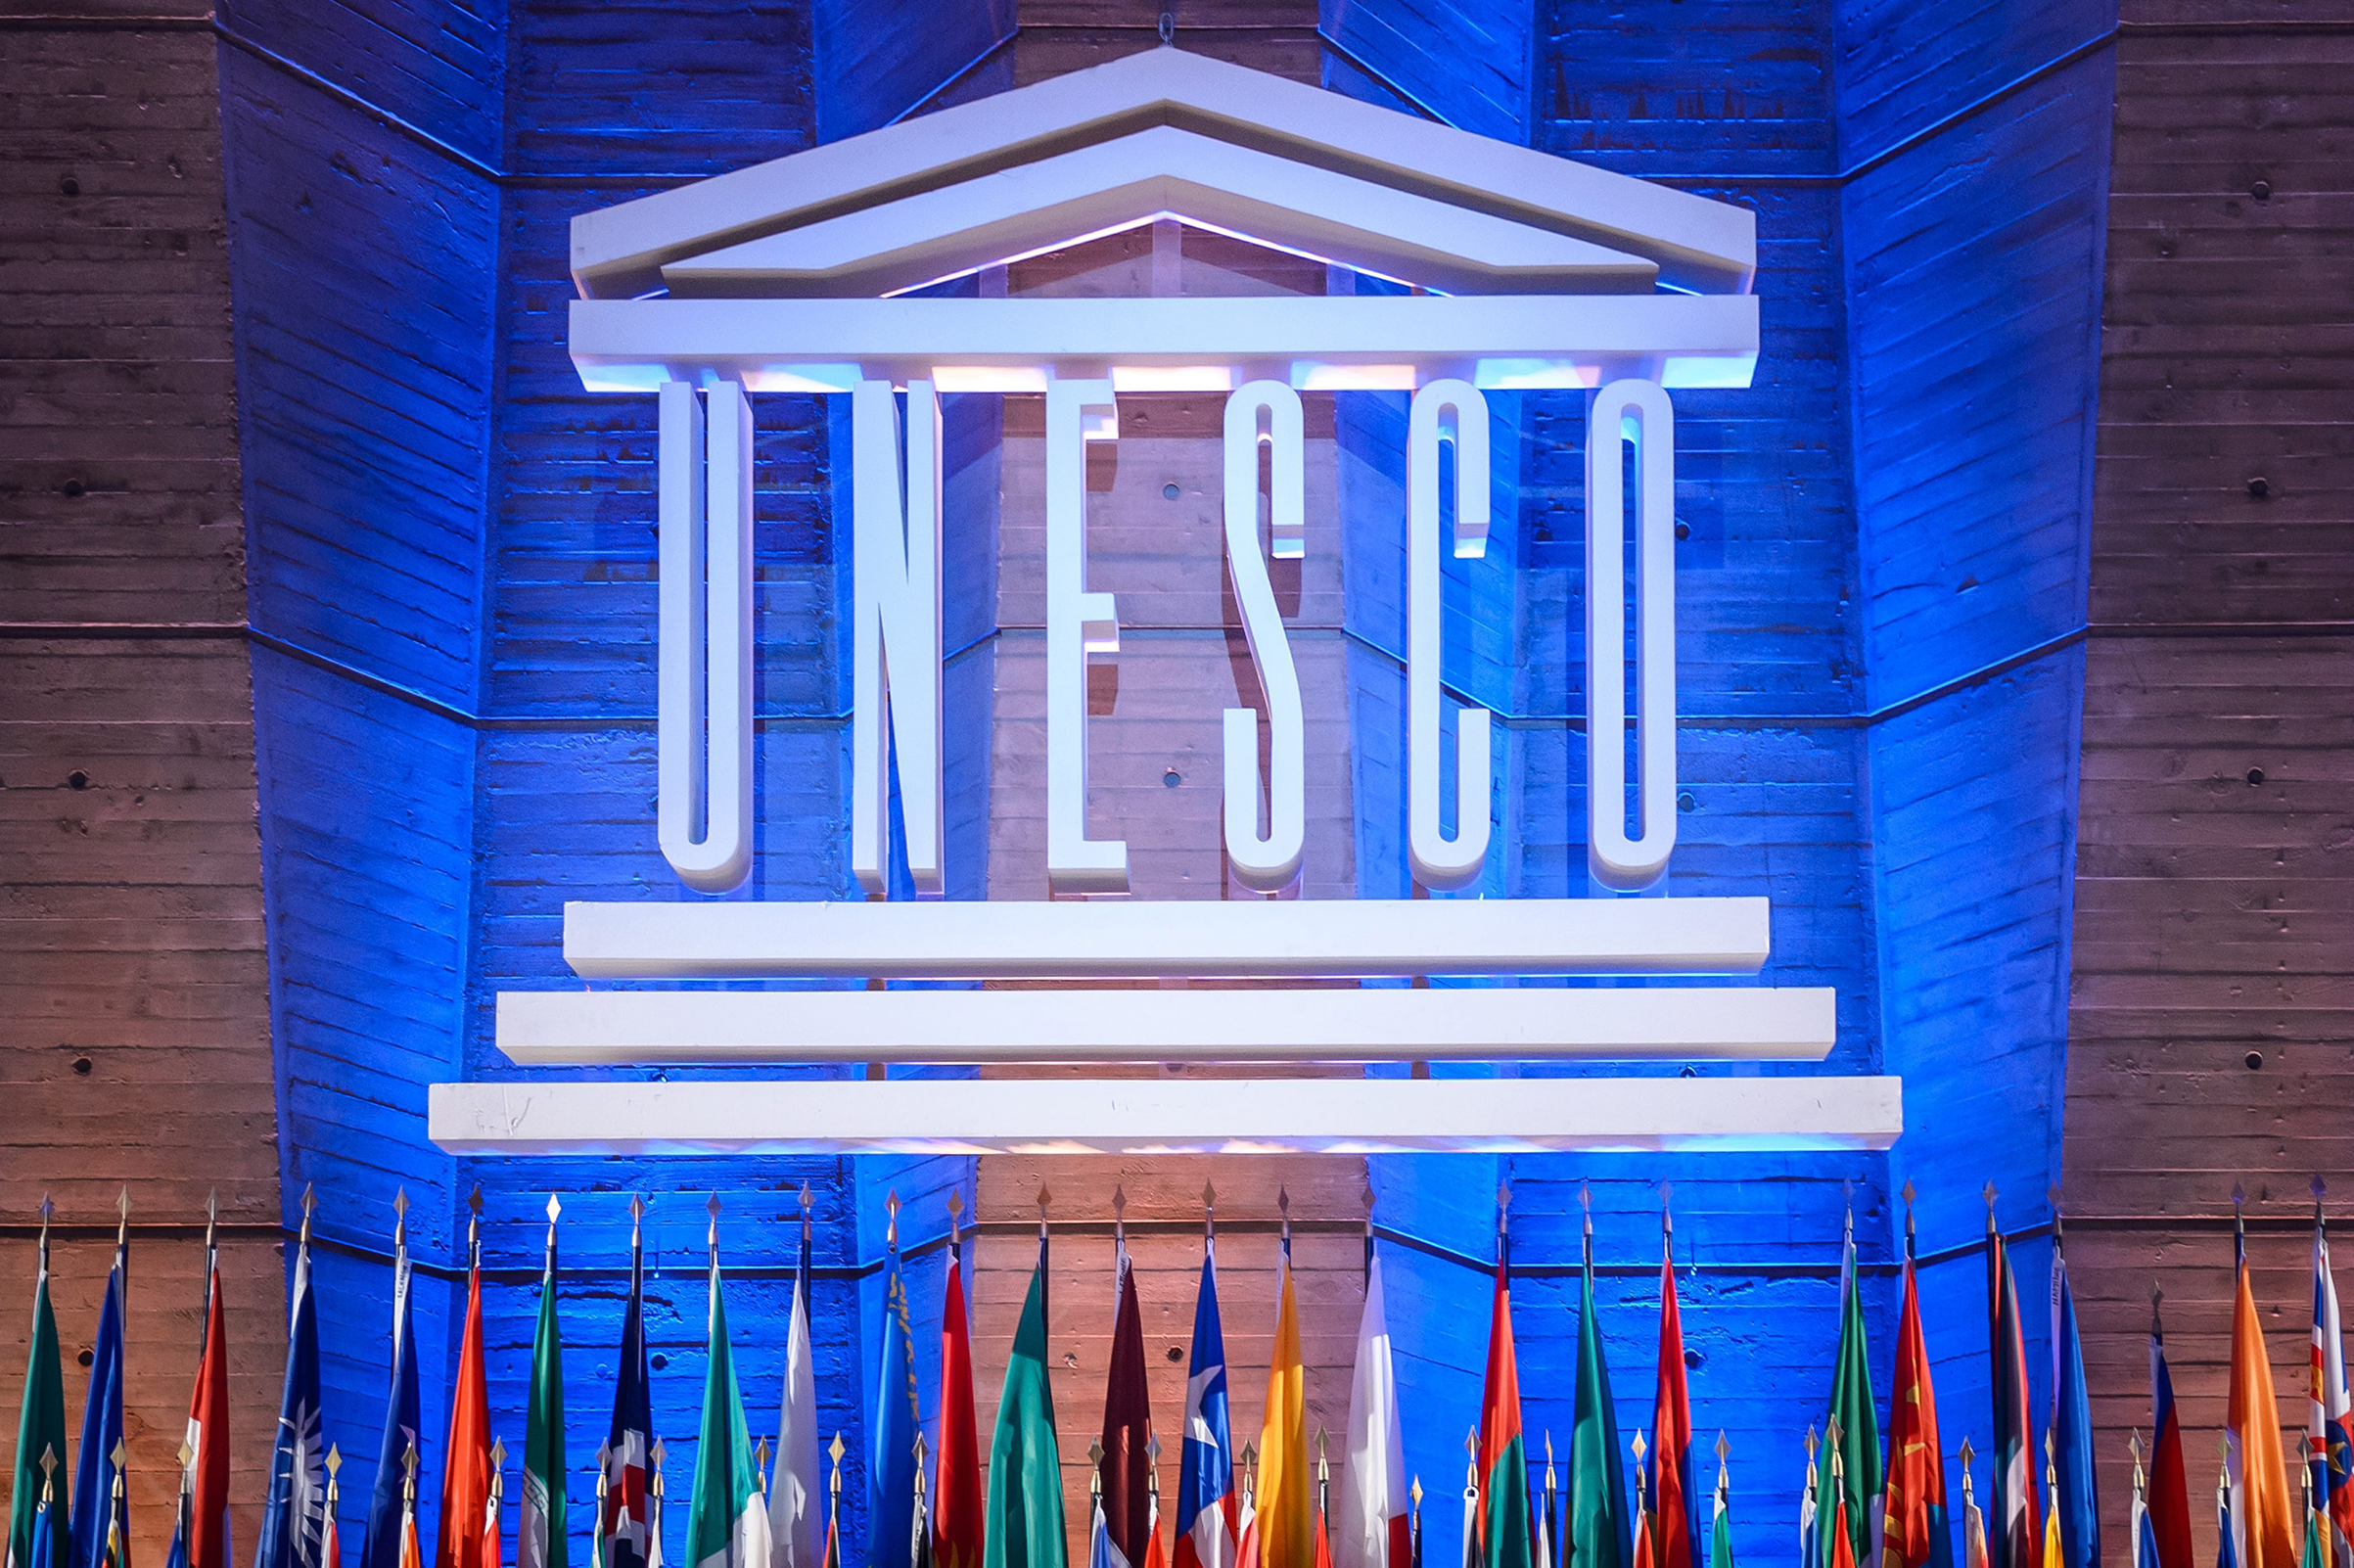 The United Nations Educational Scientific and Cultural Organization Headquarters in Paris, Nov. 9, 2015 during the 38th Session of the Unesco General Conference. (Christophe Petit Tesson—EPA/REX/Shutterstock)